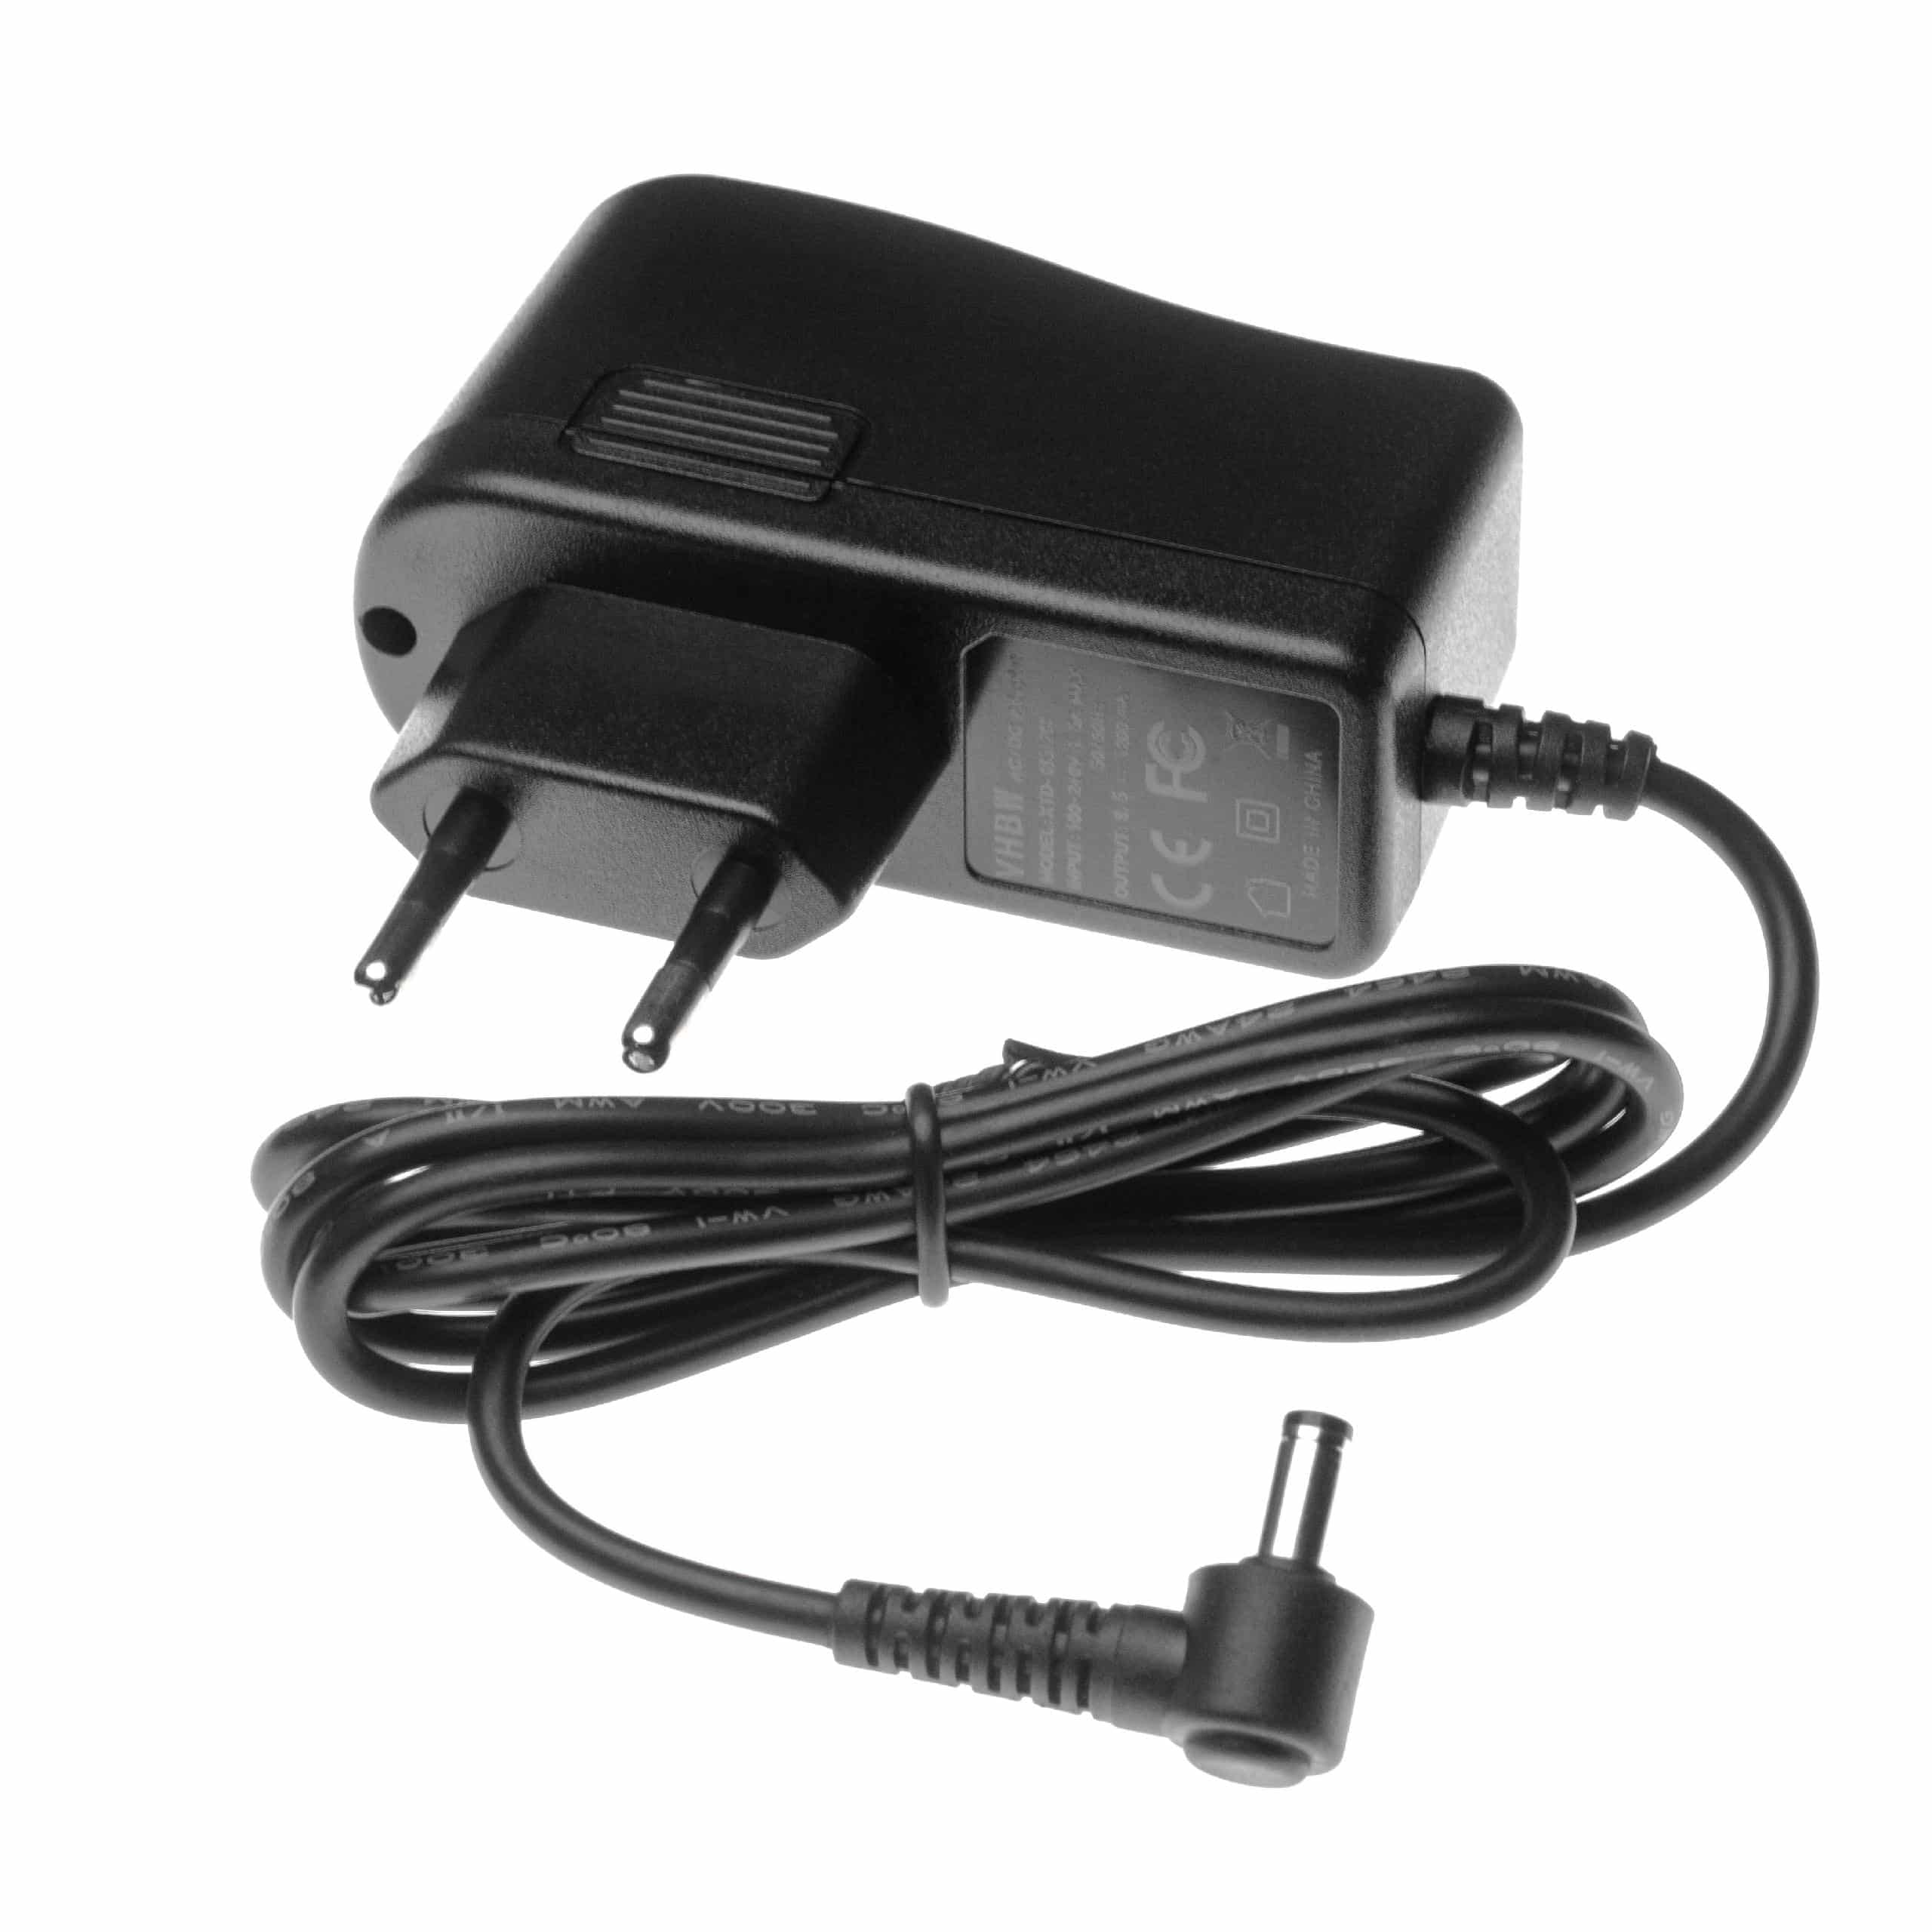 Mains Power Adapter replaces Casio AD-A95100IG, AD-A95100LW for Casio Labelling Machine - DC 9.5 V / 1.2 A